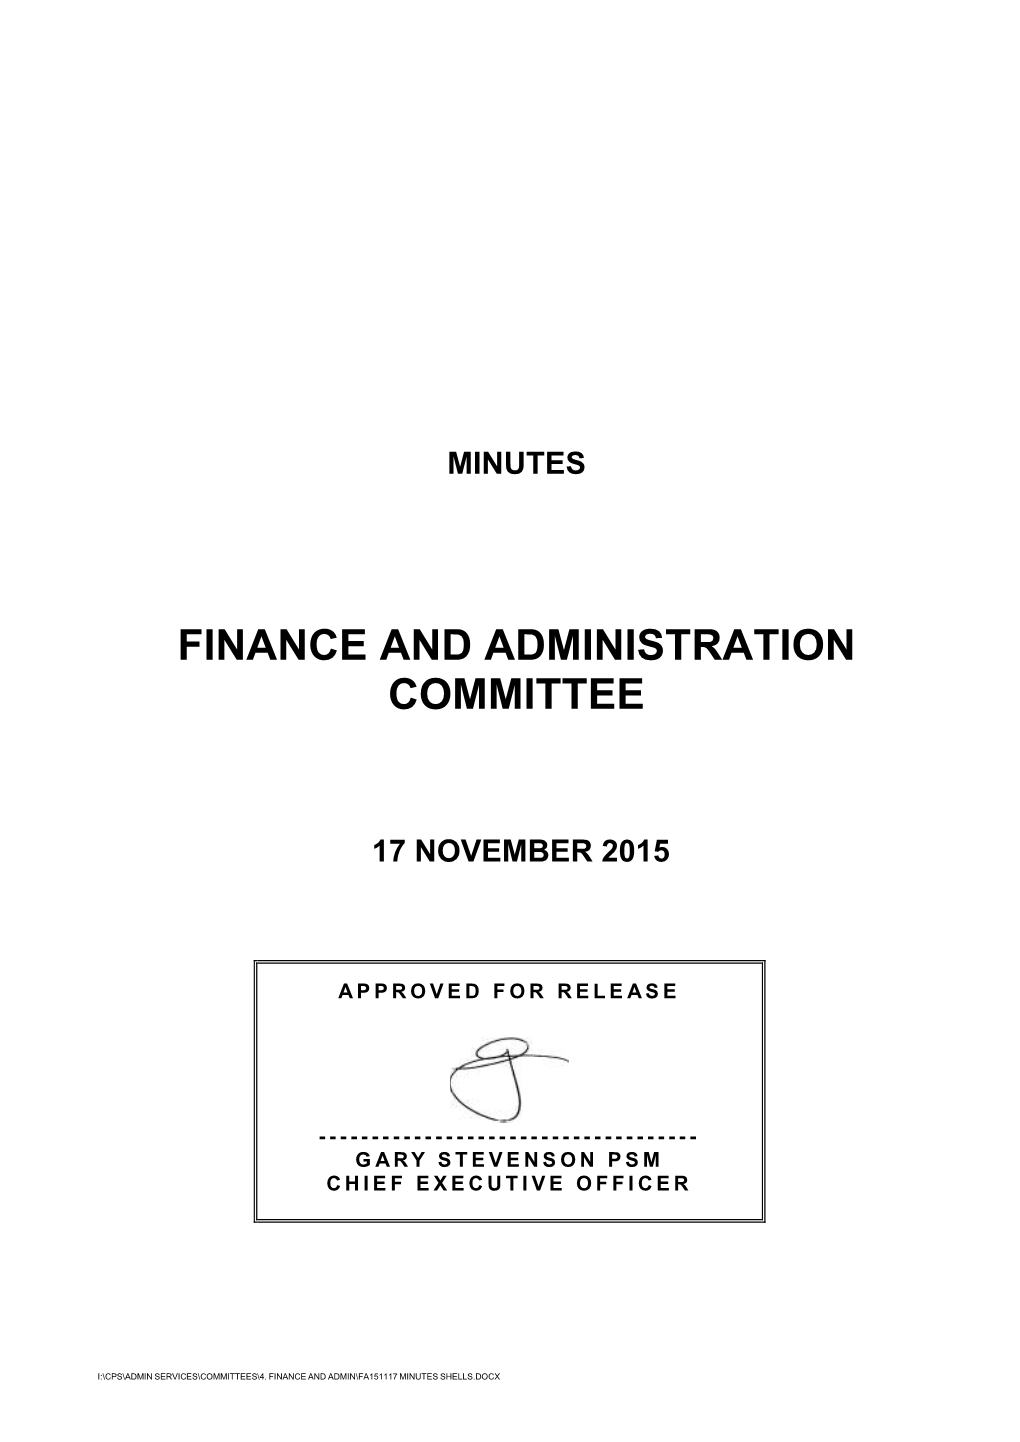 Finance and Administration Committee